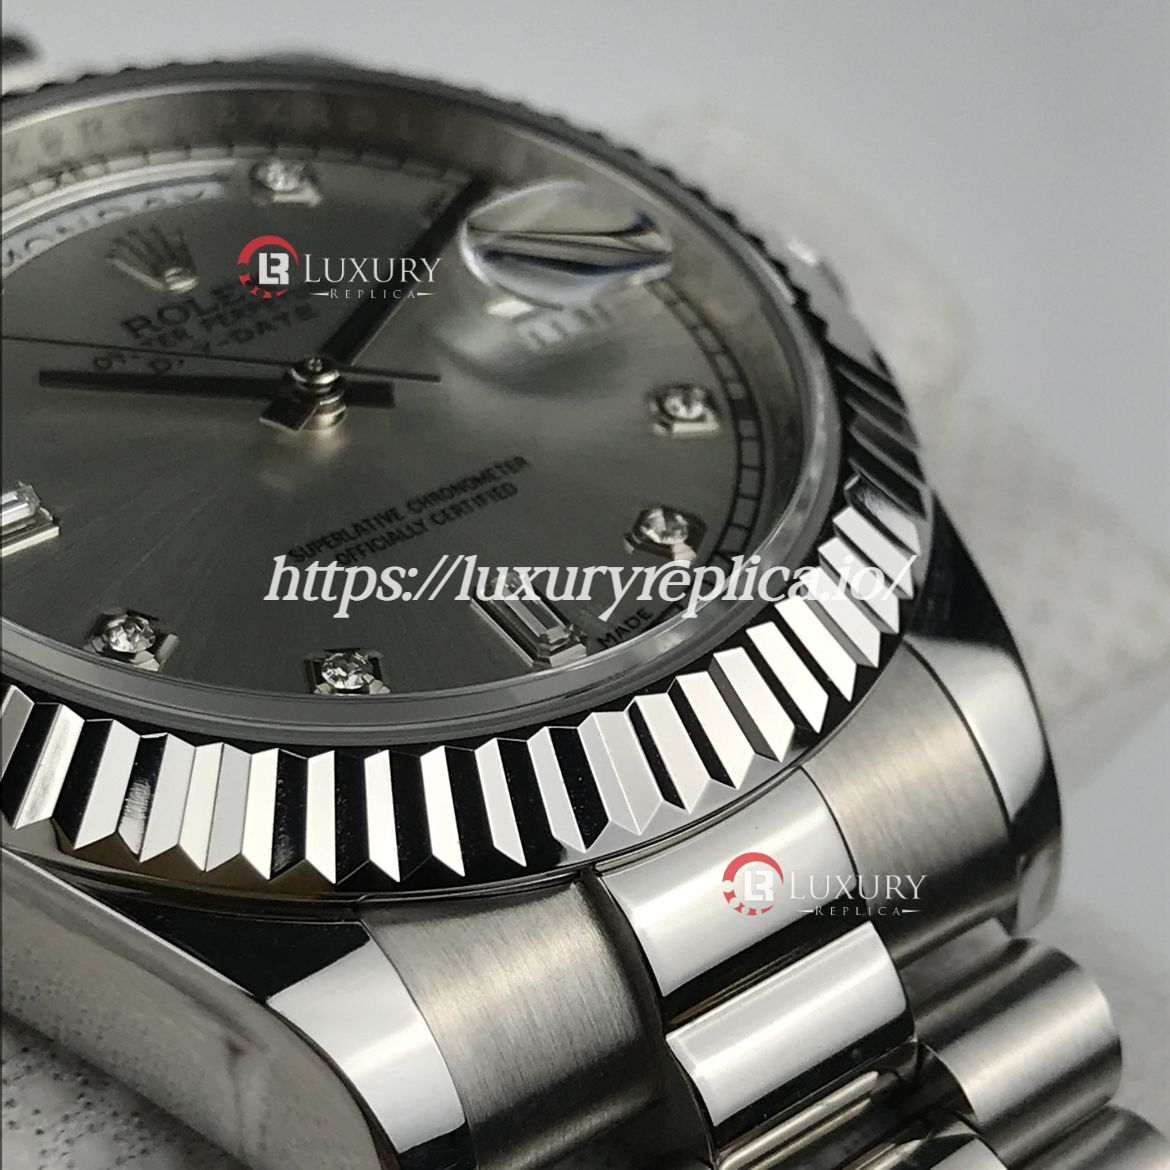 ROLEX DAY-DATE II 218239 FLUTED BEZEL SILVER DIAL DIAMOND MARKERS